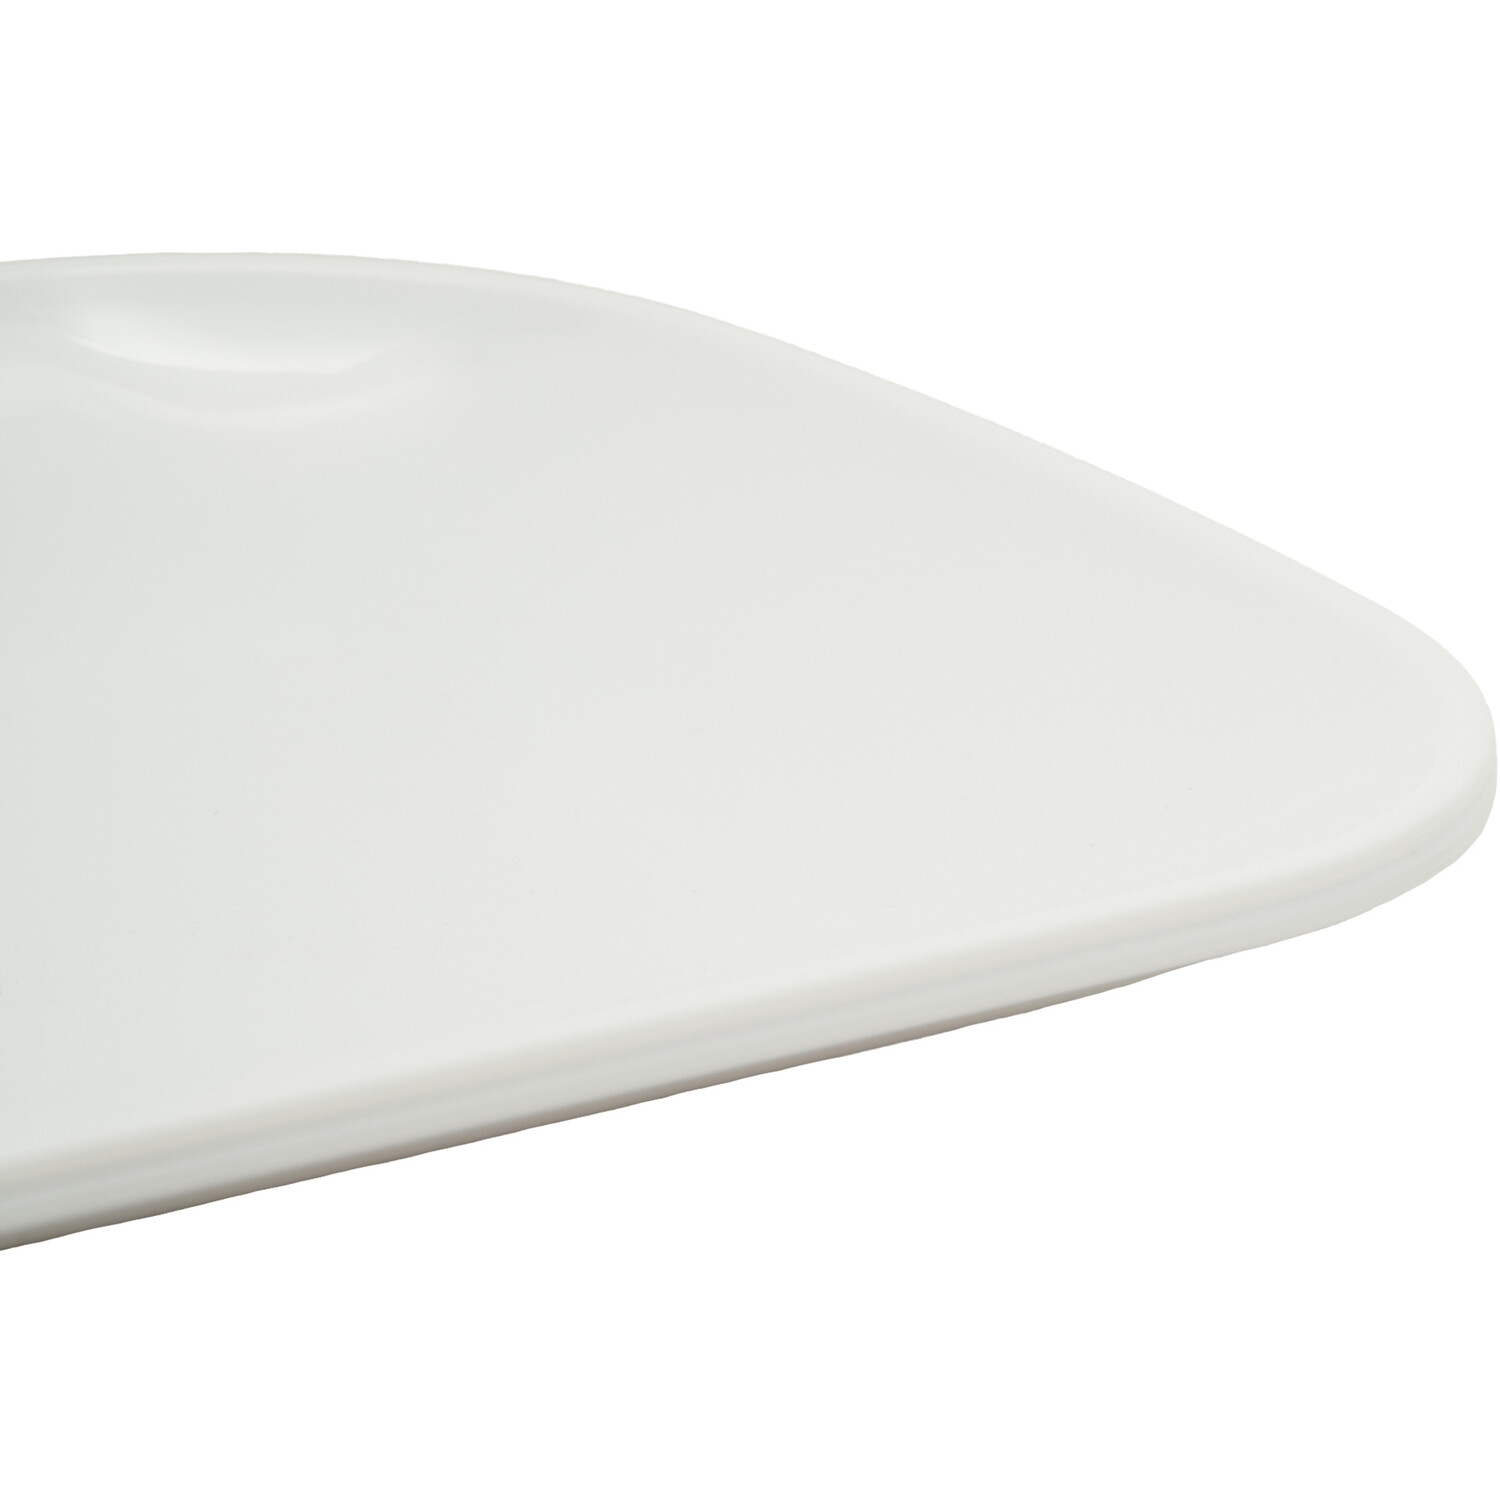 Pack of 2 Long Rectangle Serving Platters - White Image 4